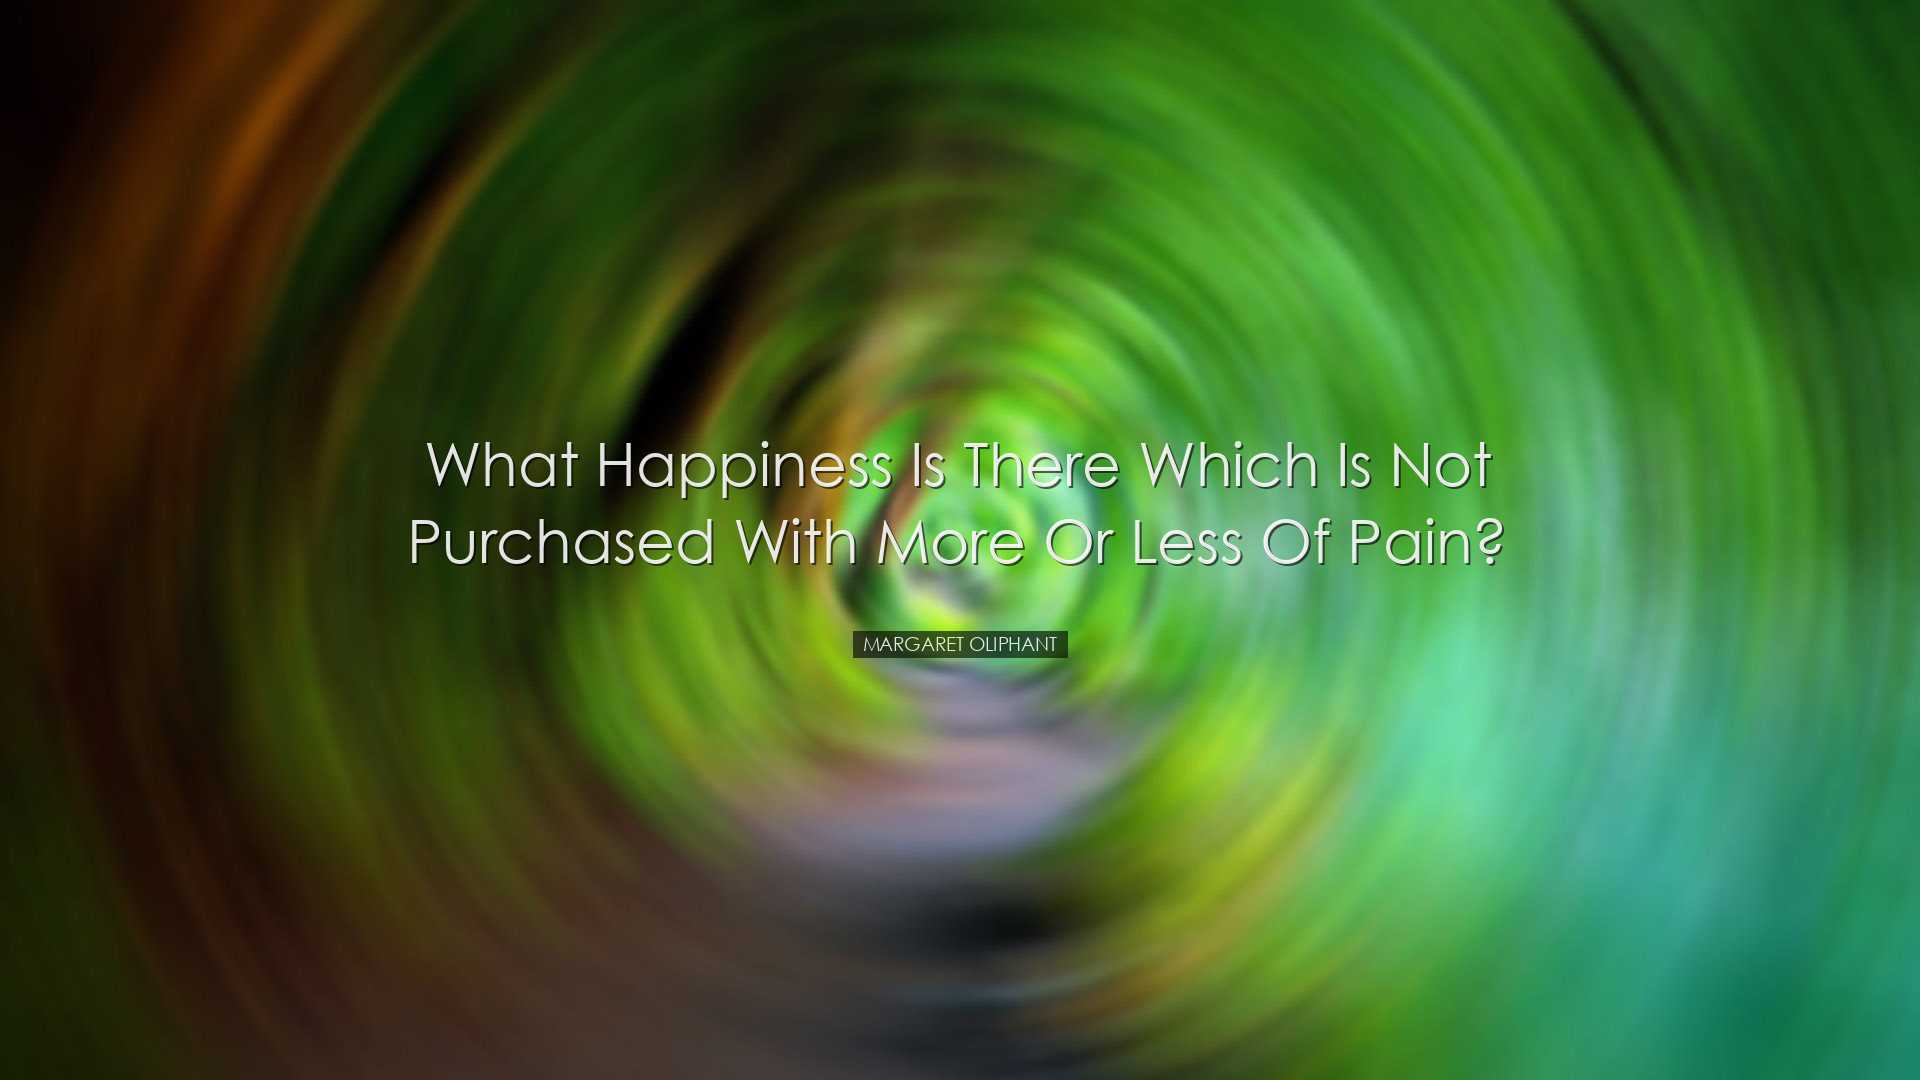 What happiness is there which is not purchased with more or less o